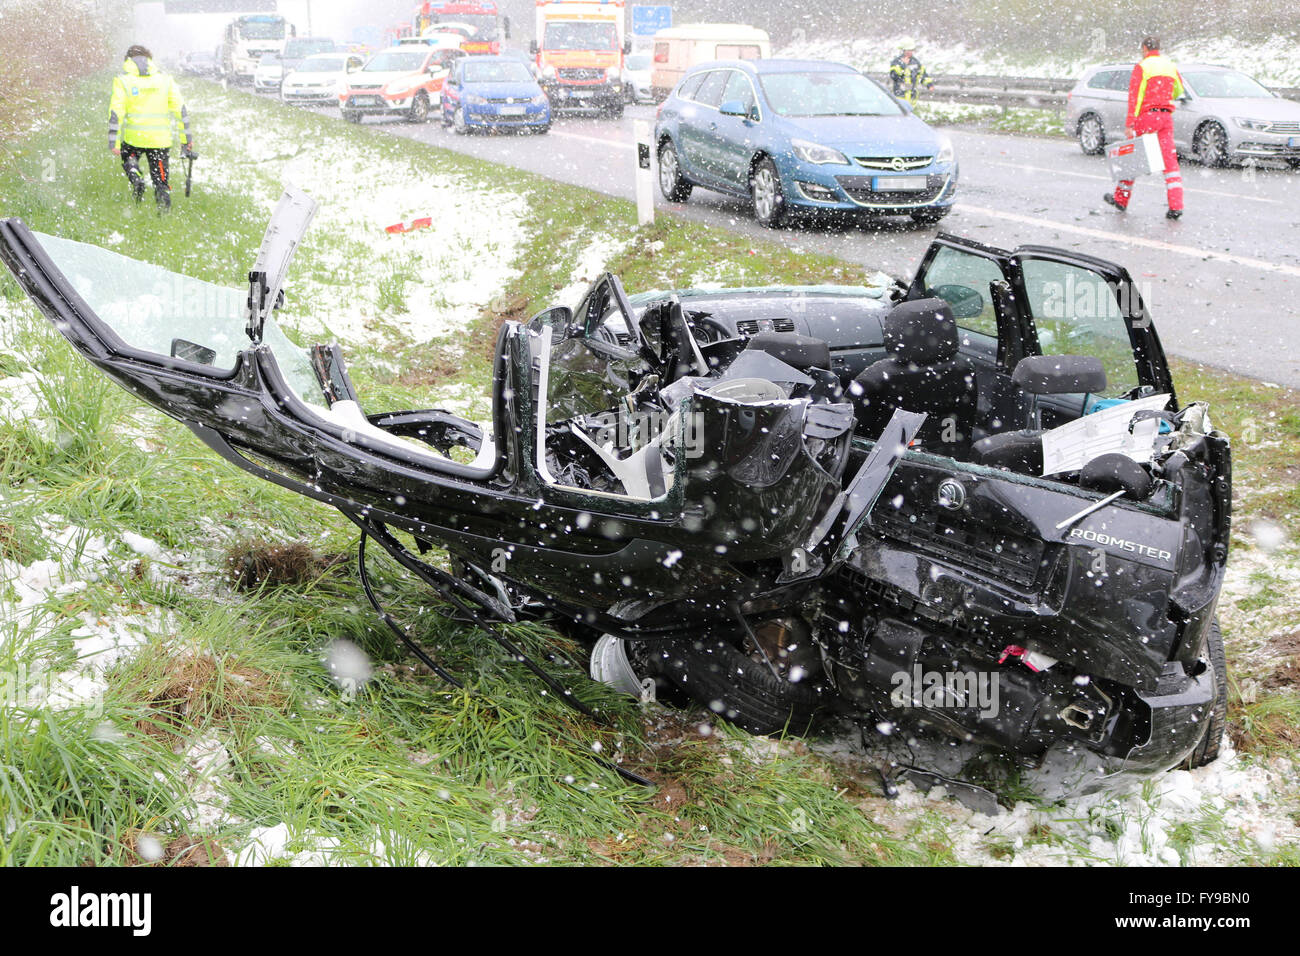 A7 motorway near Betzigau, Germany. 24th April, 2016. Emergency and rescue services are at work behind a crashed car on the A7 motorway near Betzigau, germany, 24 April 2016. Several passengers were injured and cars damaged during a mass crash on the motorway due to the ice and snow slippery surface. Credit:  dpa picture alliance/Alamy Live News Stock Photo